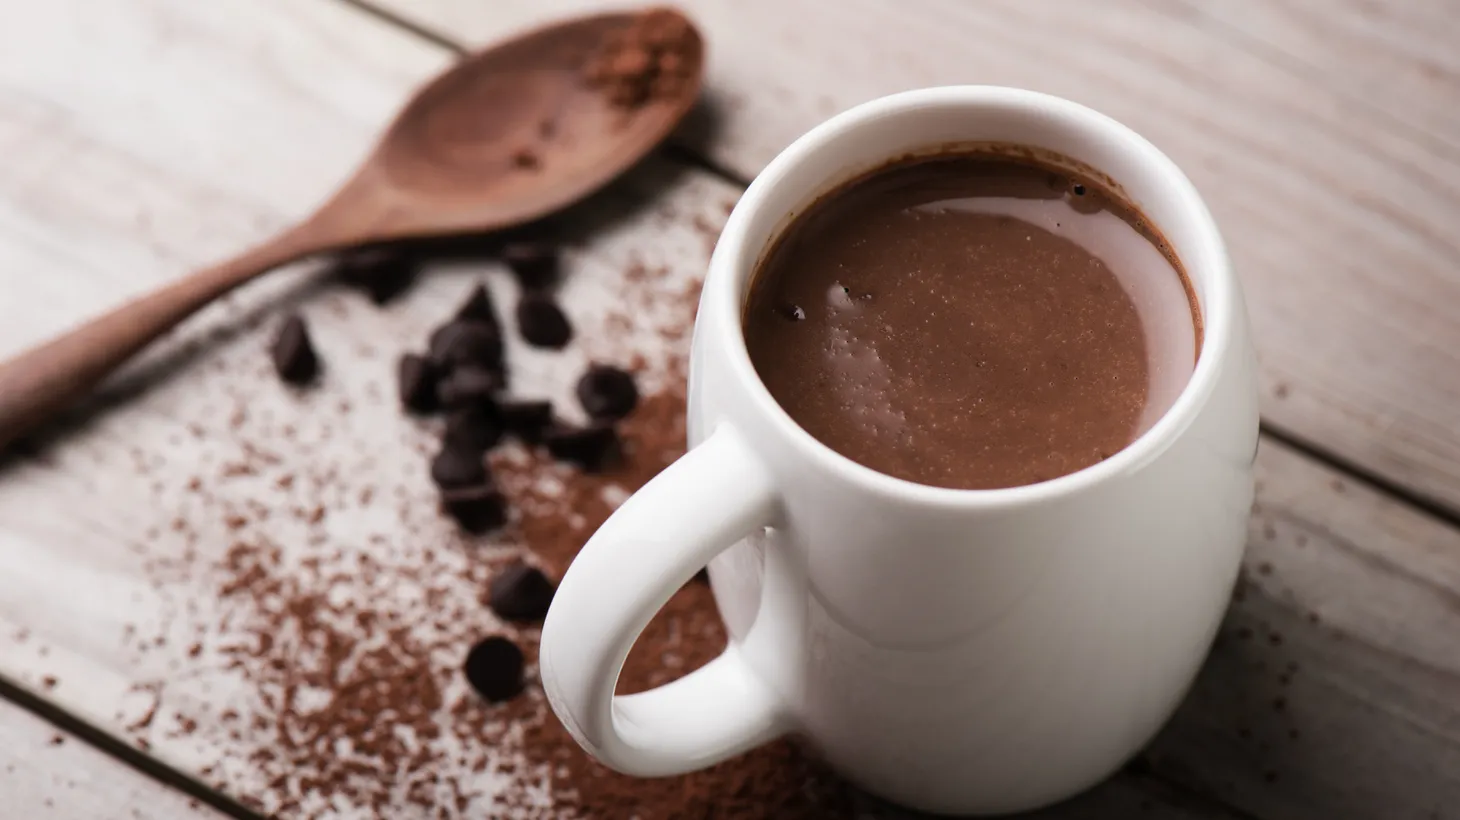 An afternoon cup of cocoa or hot chocolate is the perfect pick- me-up in cooler weather.